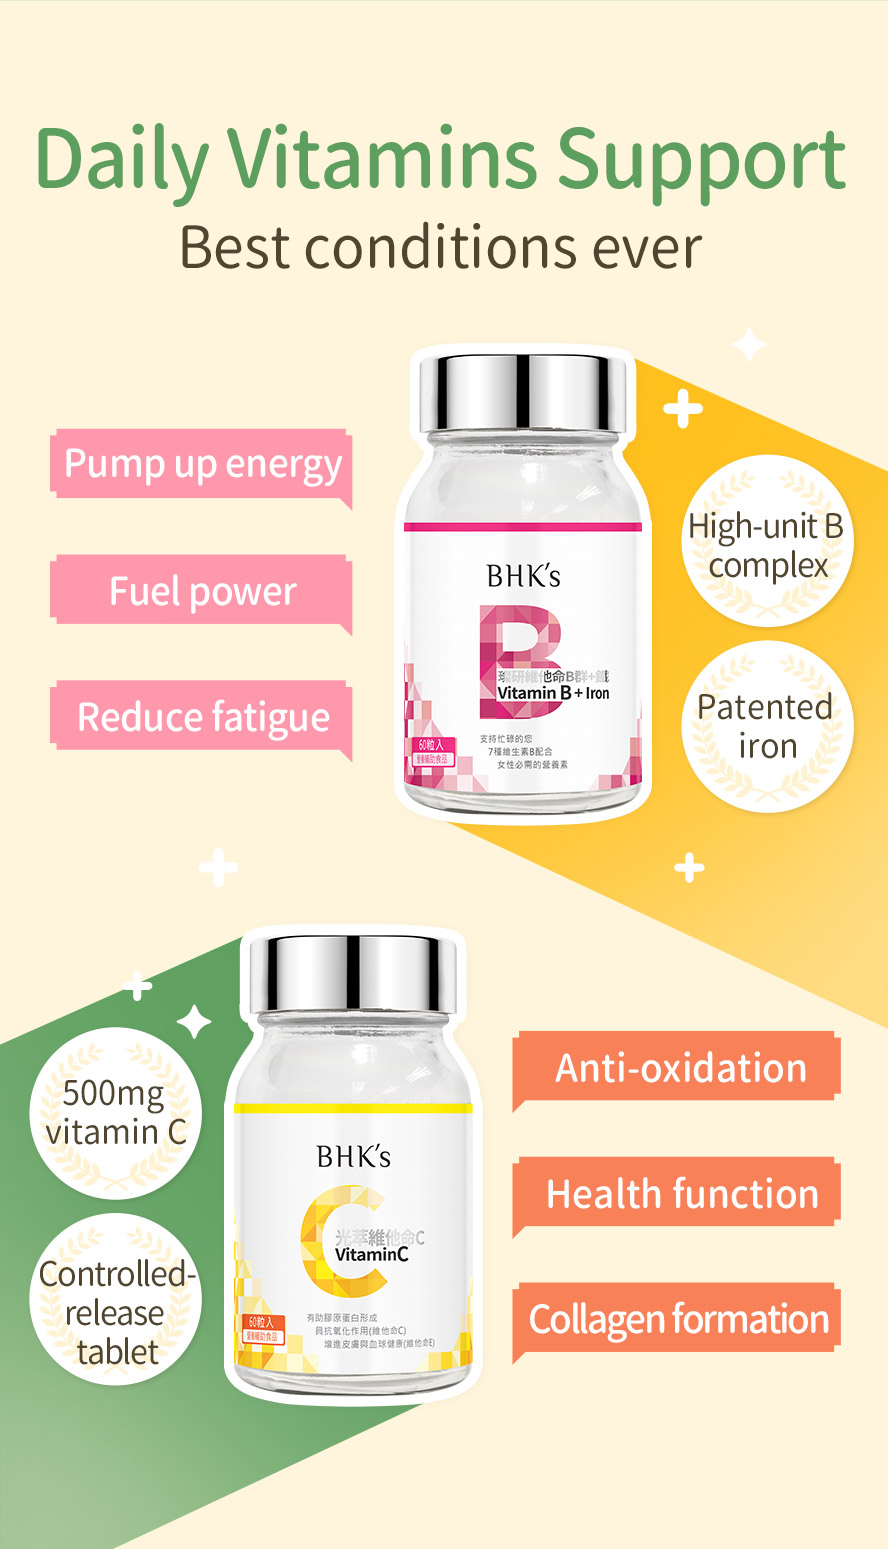 BHK vitamin C and B group function, B group can help refresh, relieve fatigue, vitamin C has antioxidant effect, promote collagen formation